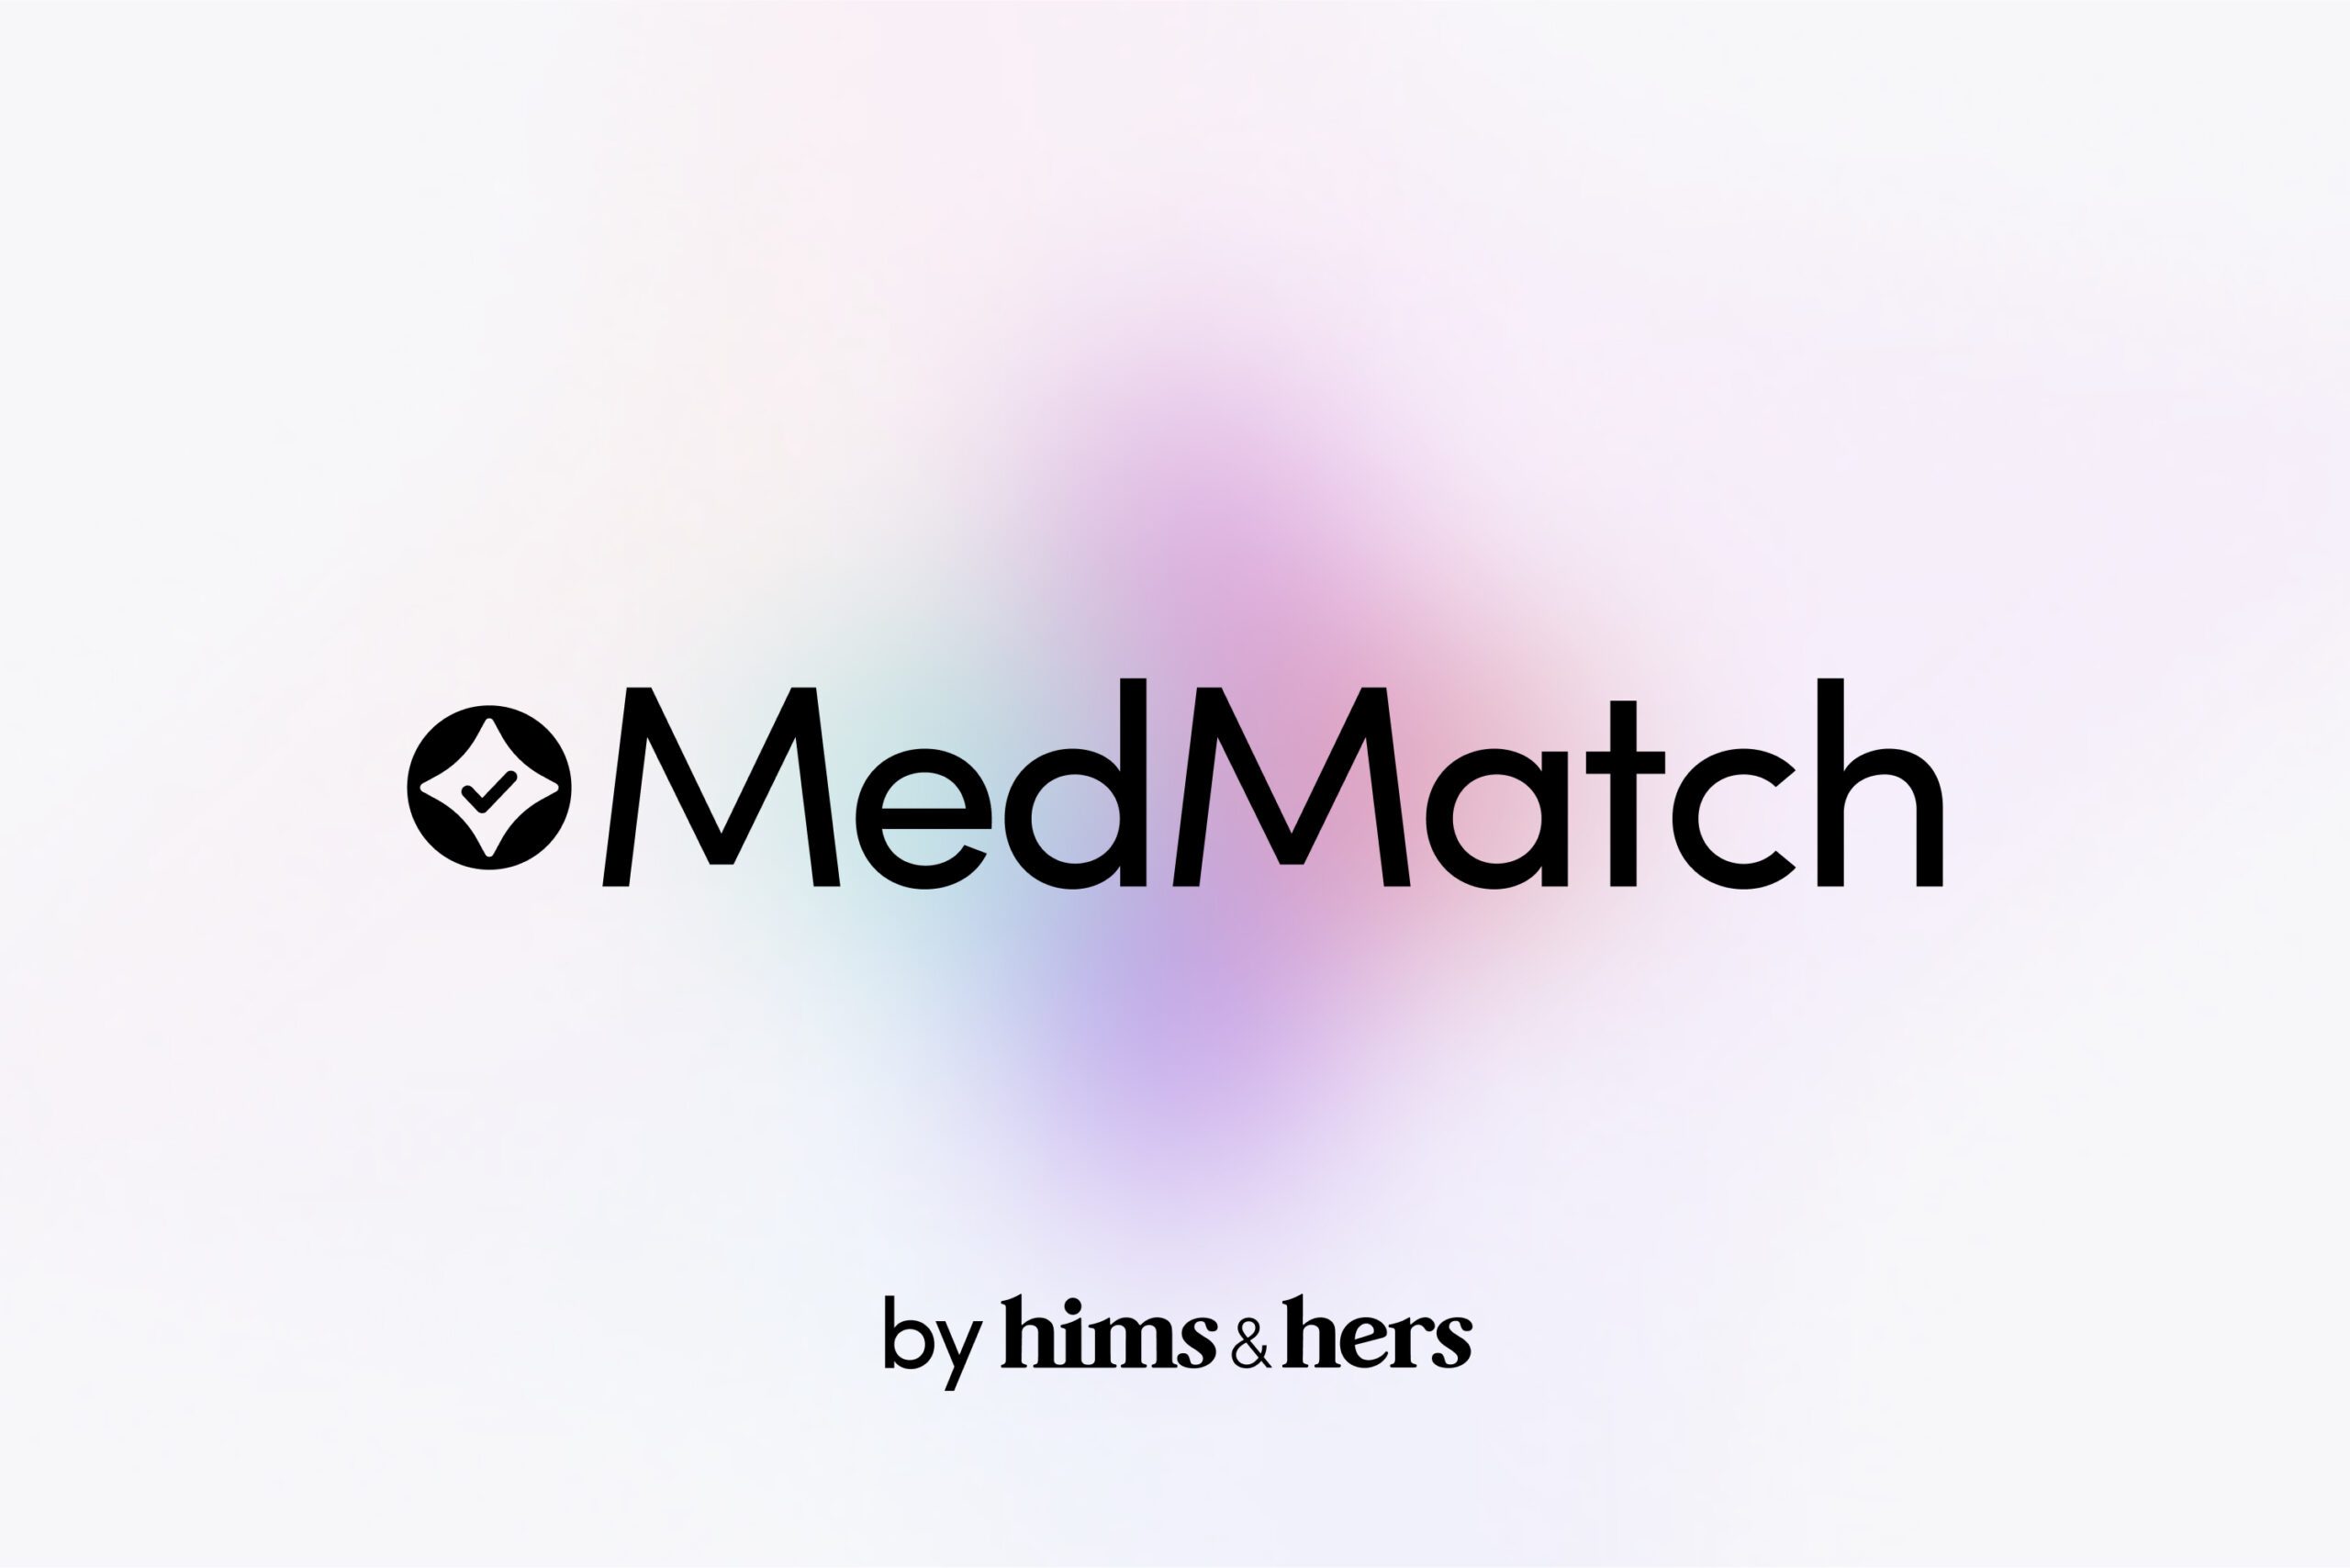 Hims & Hers Launches AI Service to Help Providers Personalize Treatments